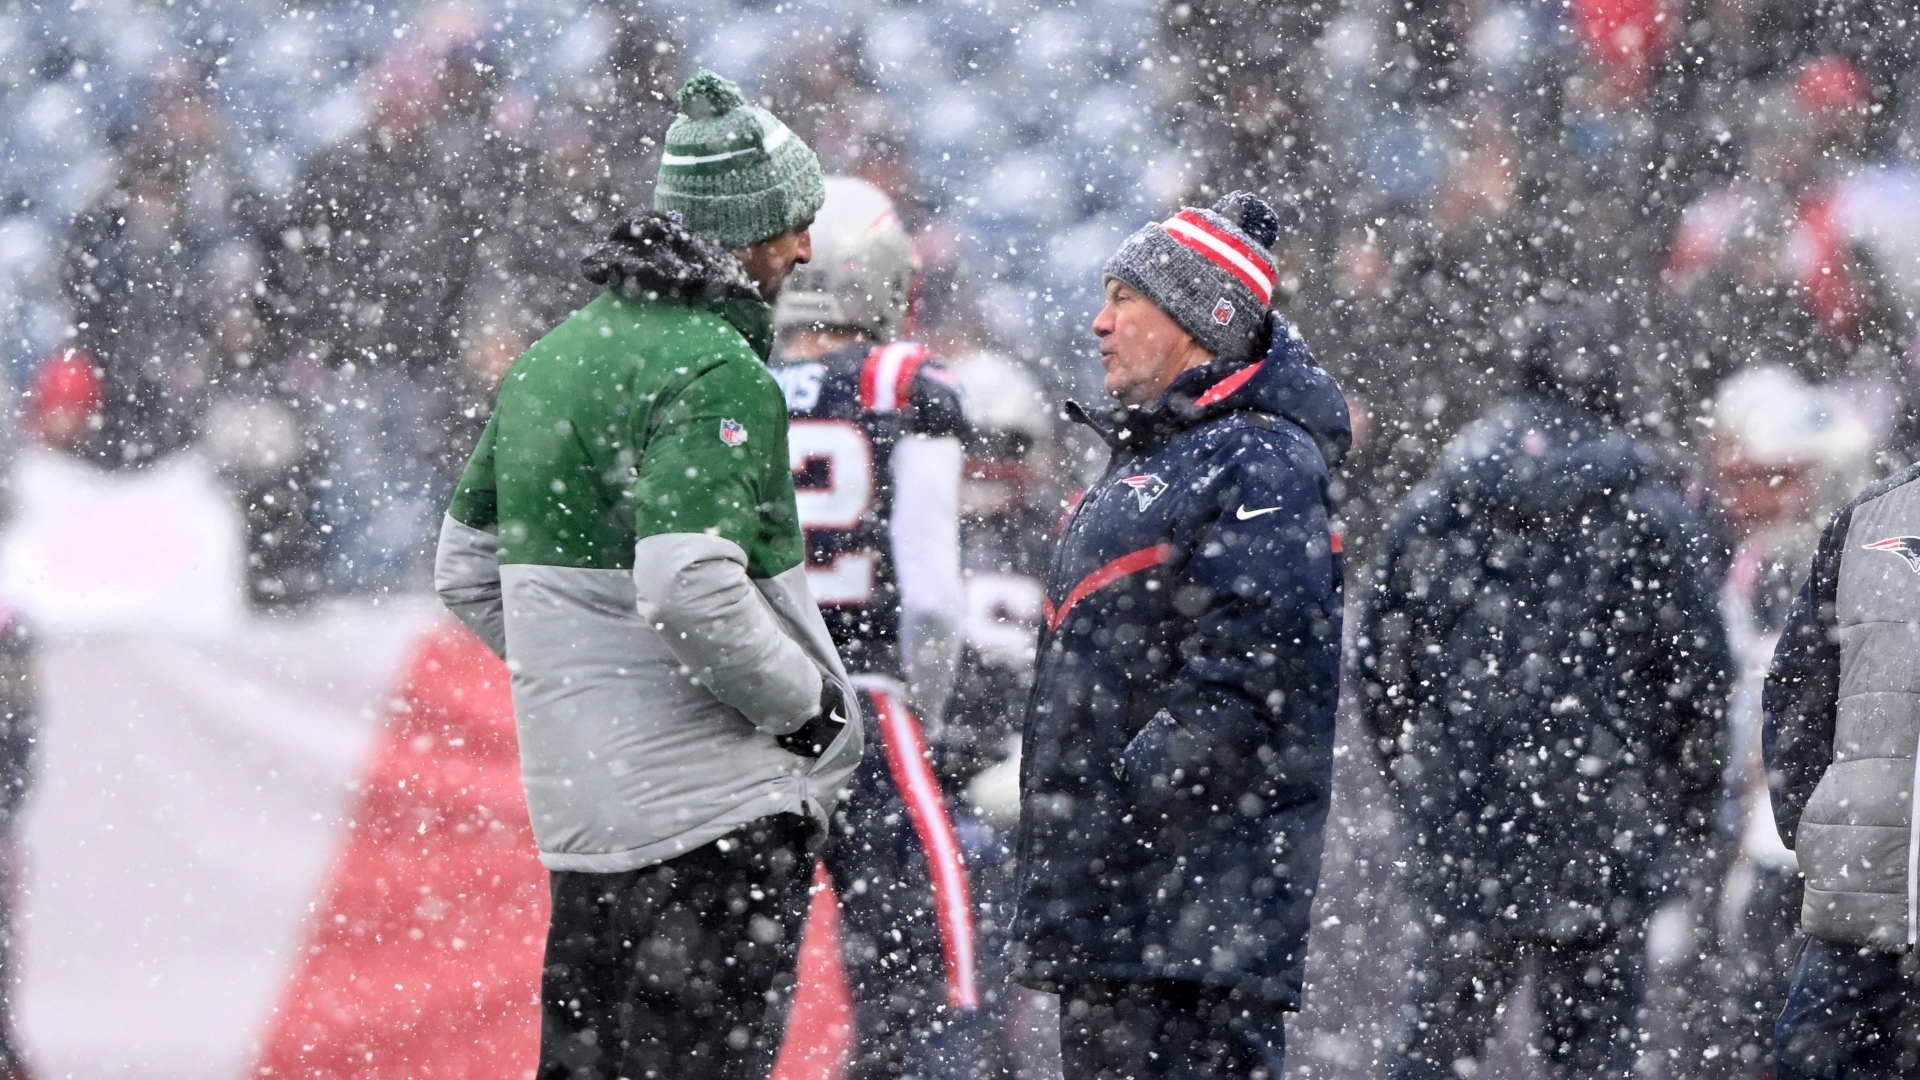 Defeating Bill Belichick In Possible Patriots Finale ‘Special’ For
Jets